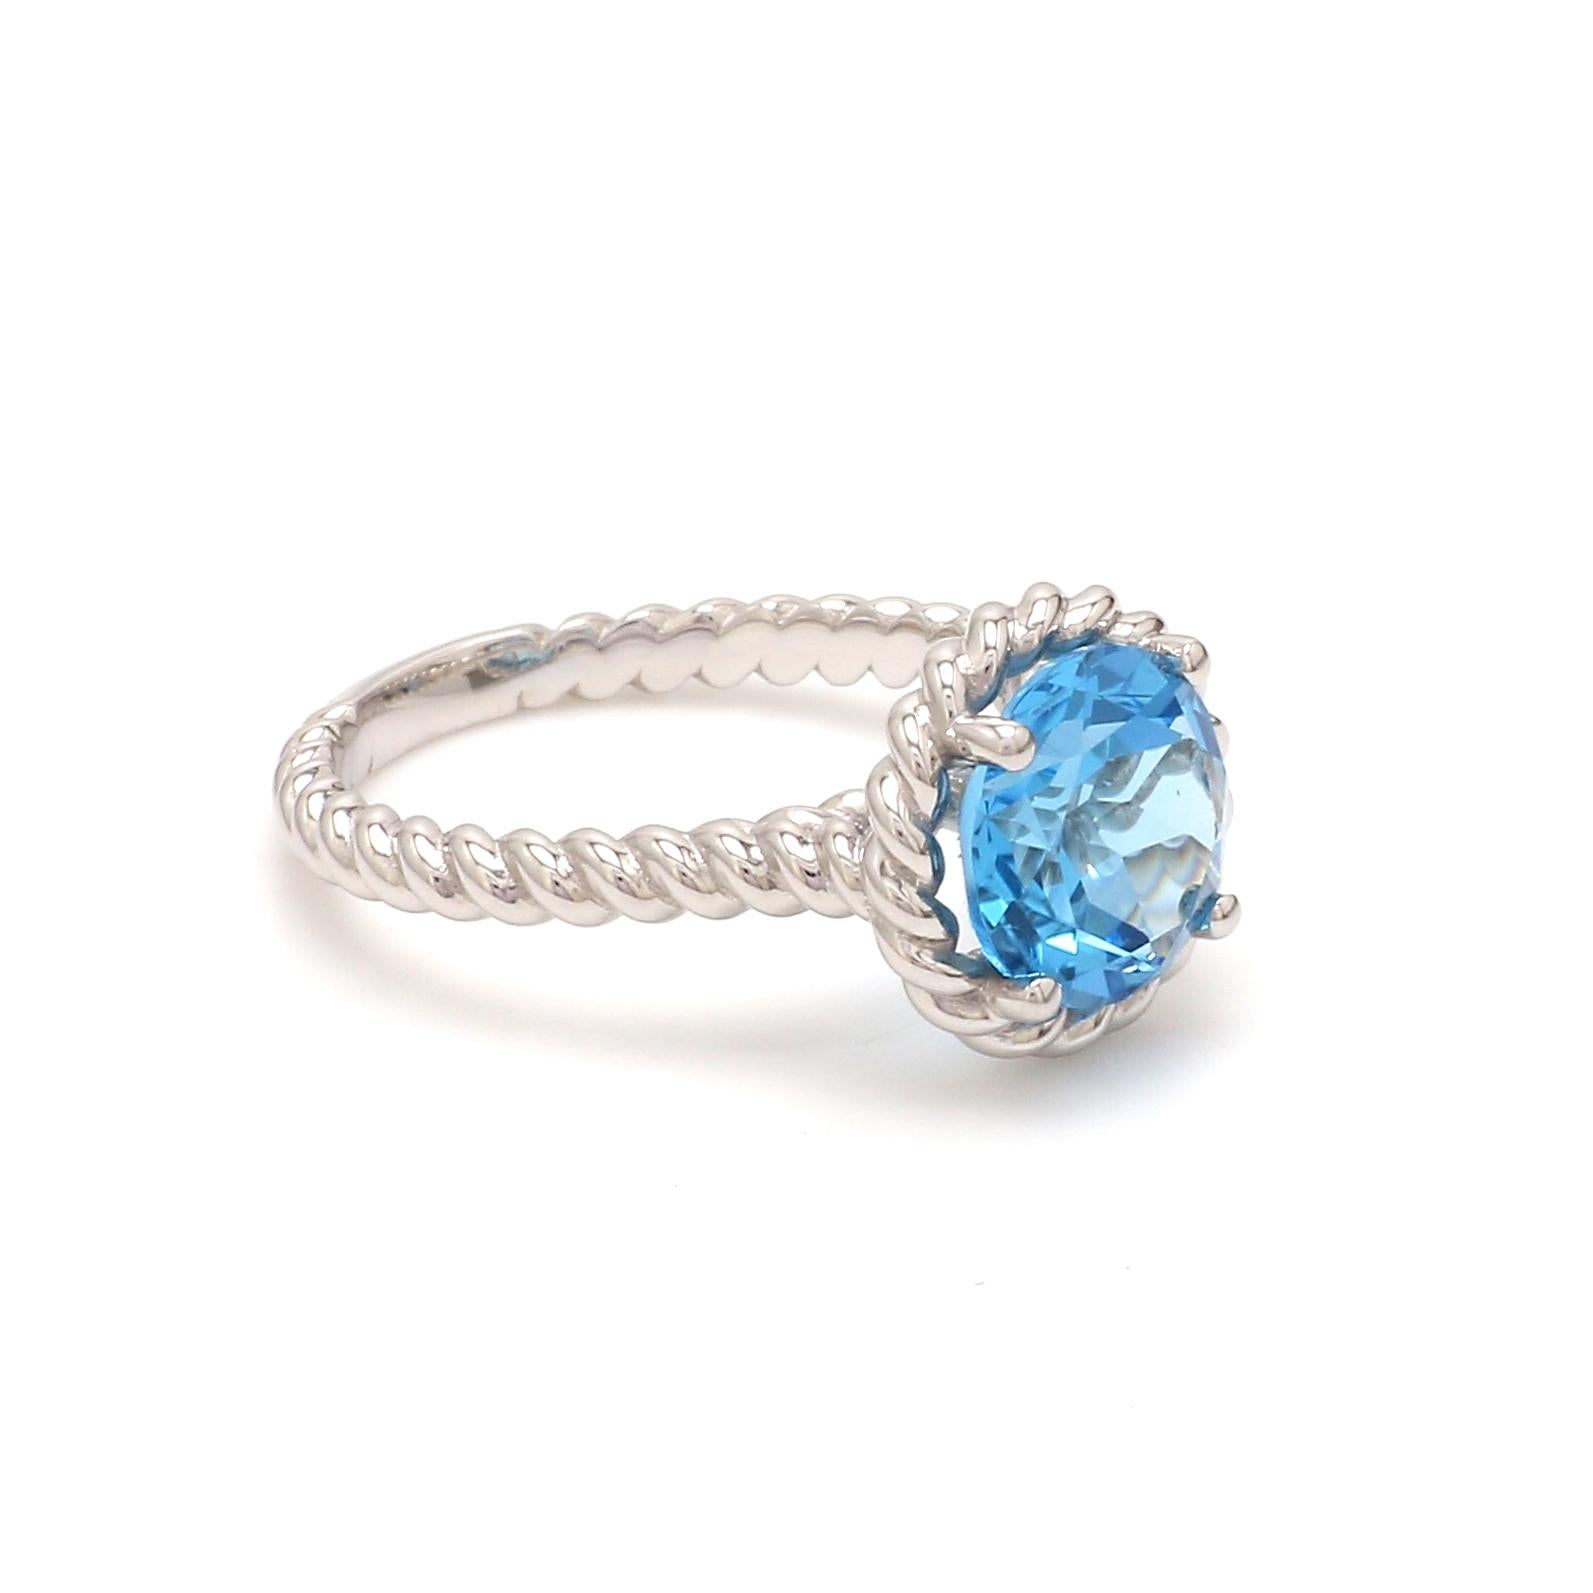 Round Shape Swiss Blue Topaz Gemstone  beautifully crafted  in a Ring. A fiery Blue color December Birthstone. For a special occasion like Engagement or Proposal or may be as a gift for a special person.

Primary Stone Size - 9x9mm